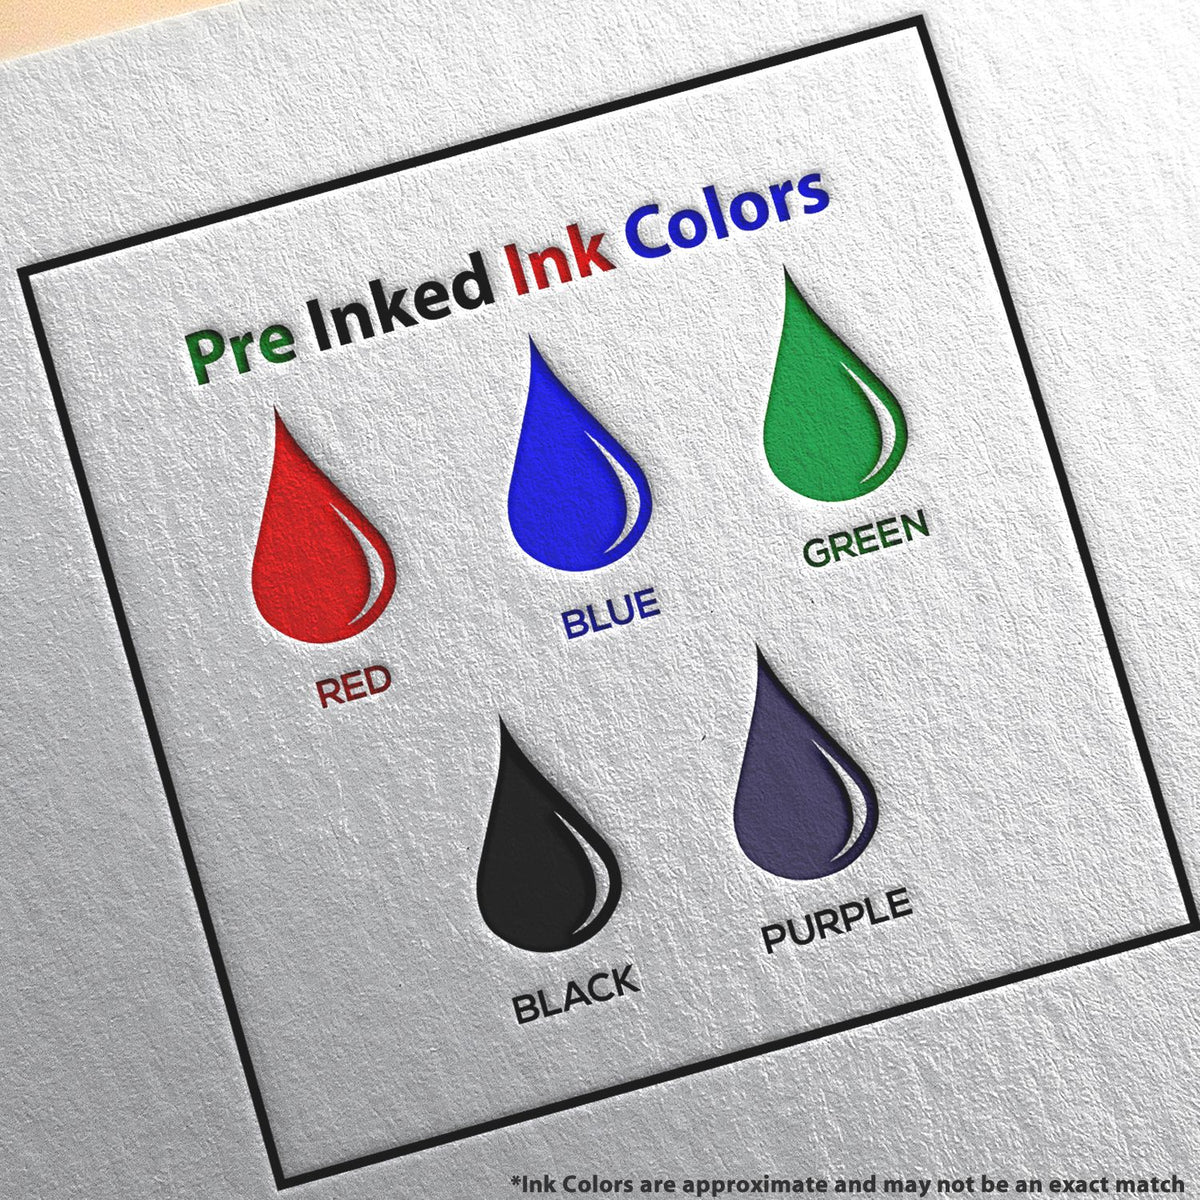 A picture showing the different ink colors or hues available for the Slim Pre-Inked Indiana Land Surveyor Seal Stamp product.